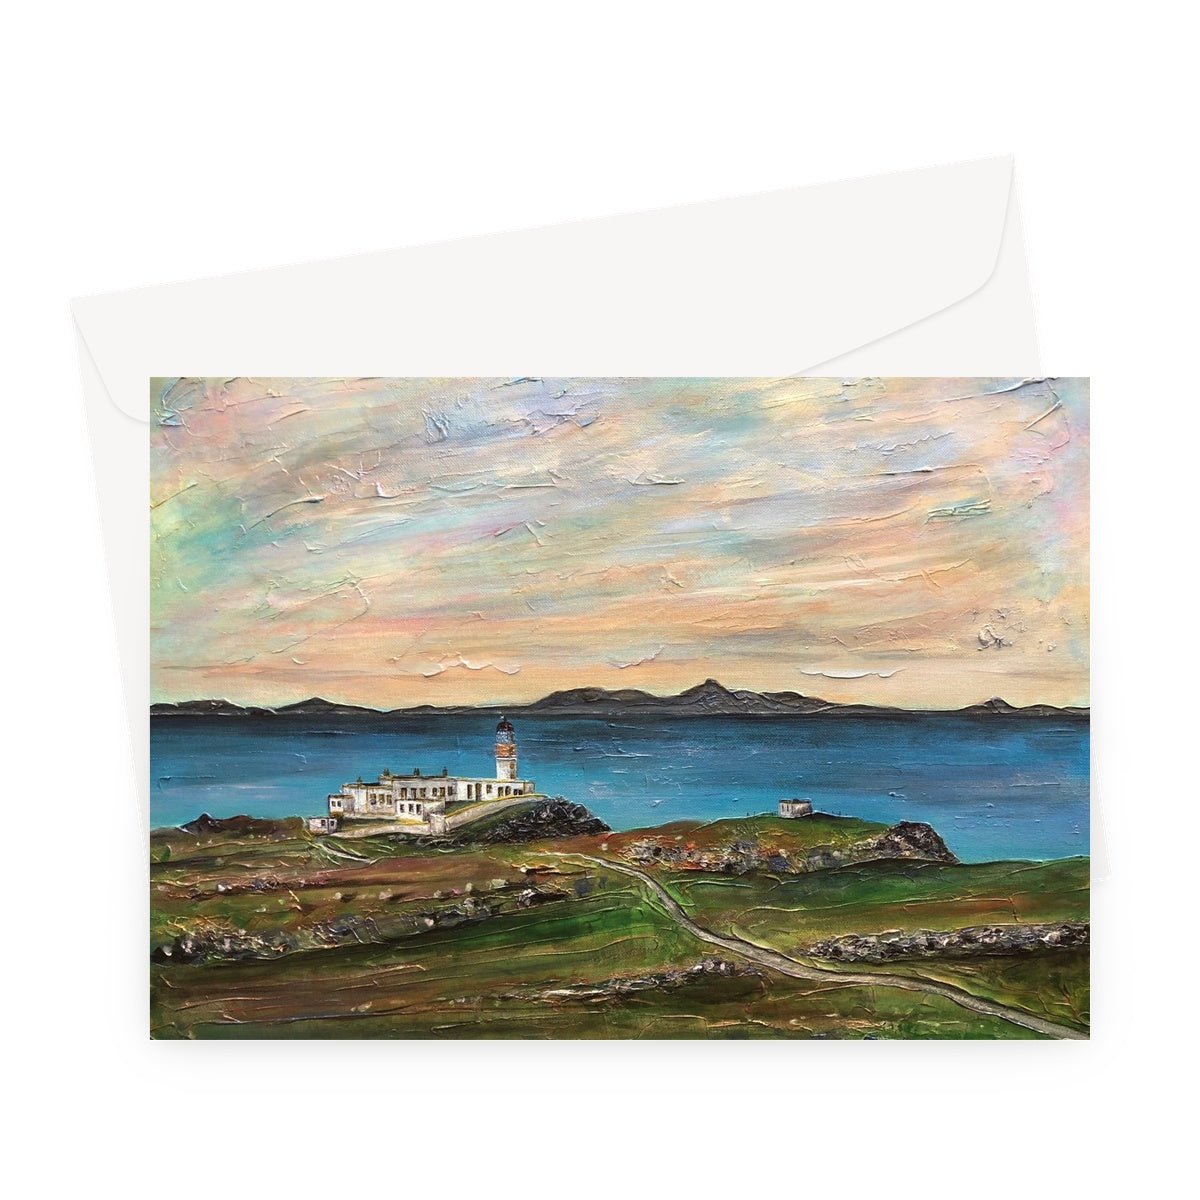 Neist Point Skye Art Gifts Greeting Card-Greetings Cards-Skye Art Gallery-A5 Landscape-10 Cards-Paintings, Prints, Homeware, Art Gifts From Scotland By Scottish Artist Kevin Hunter